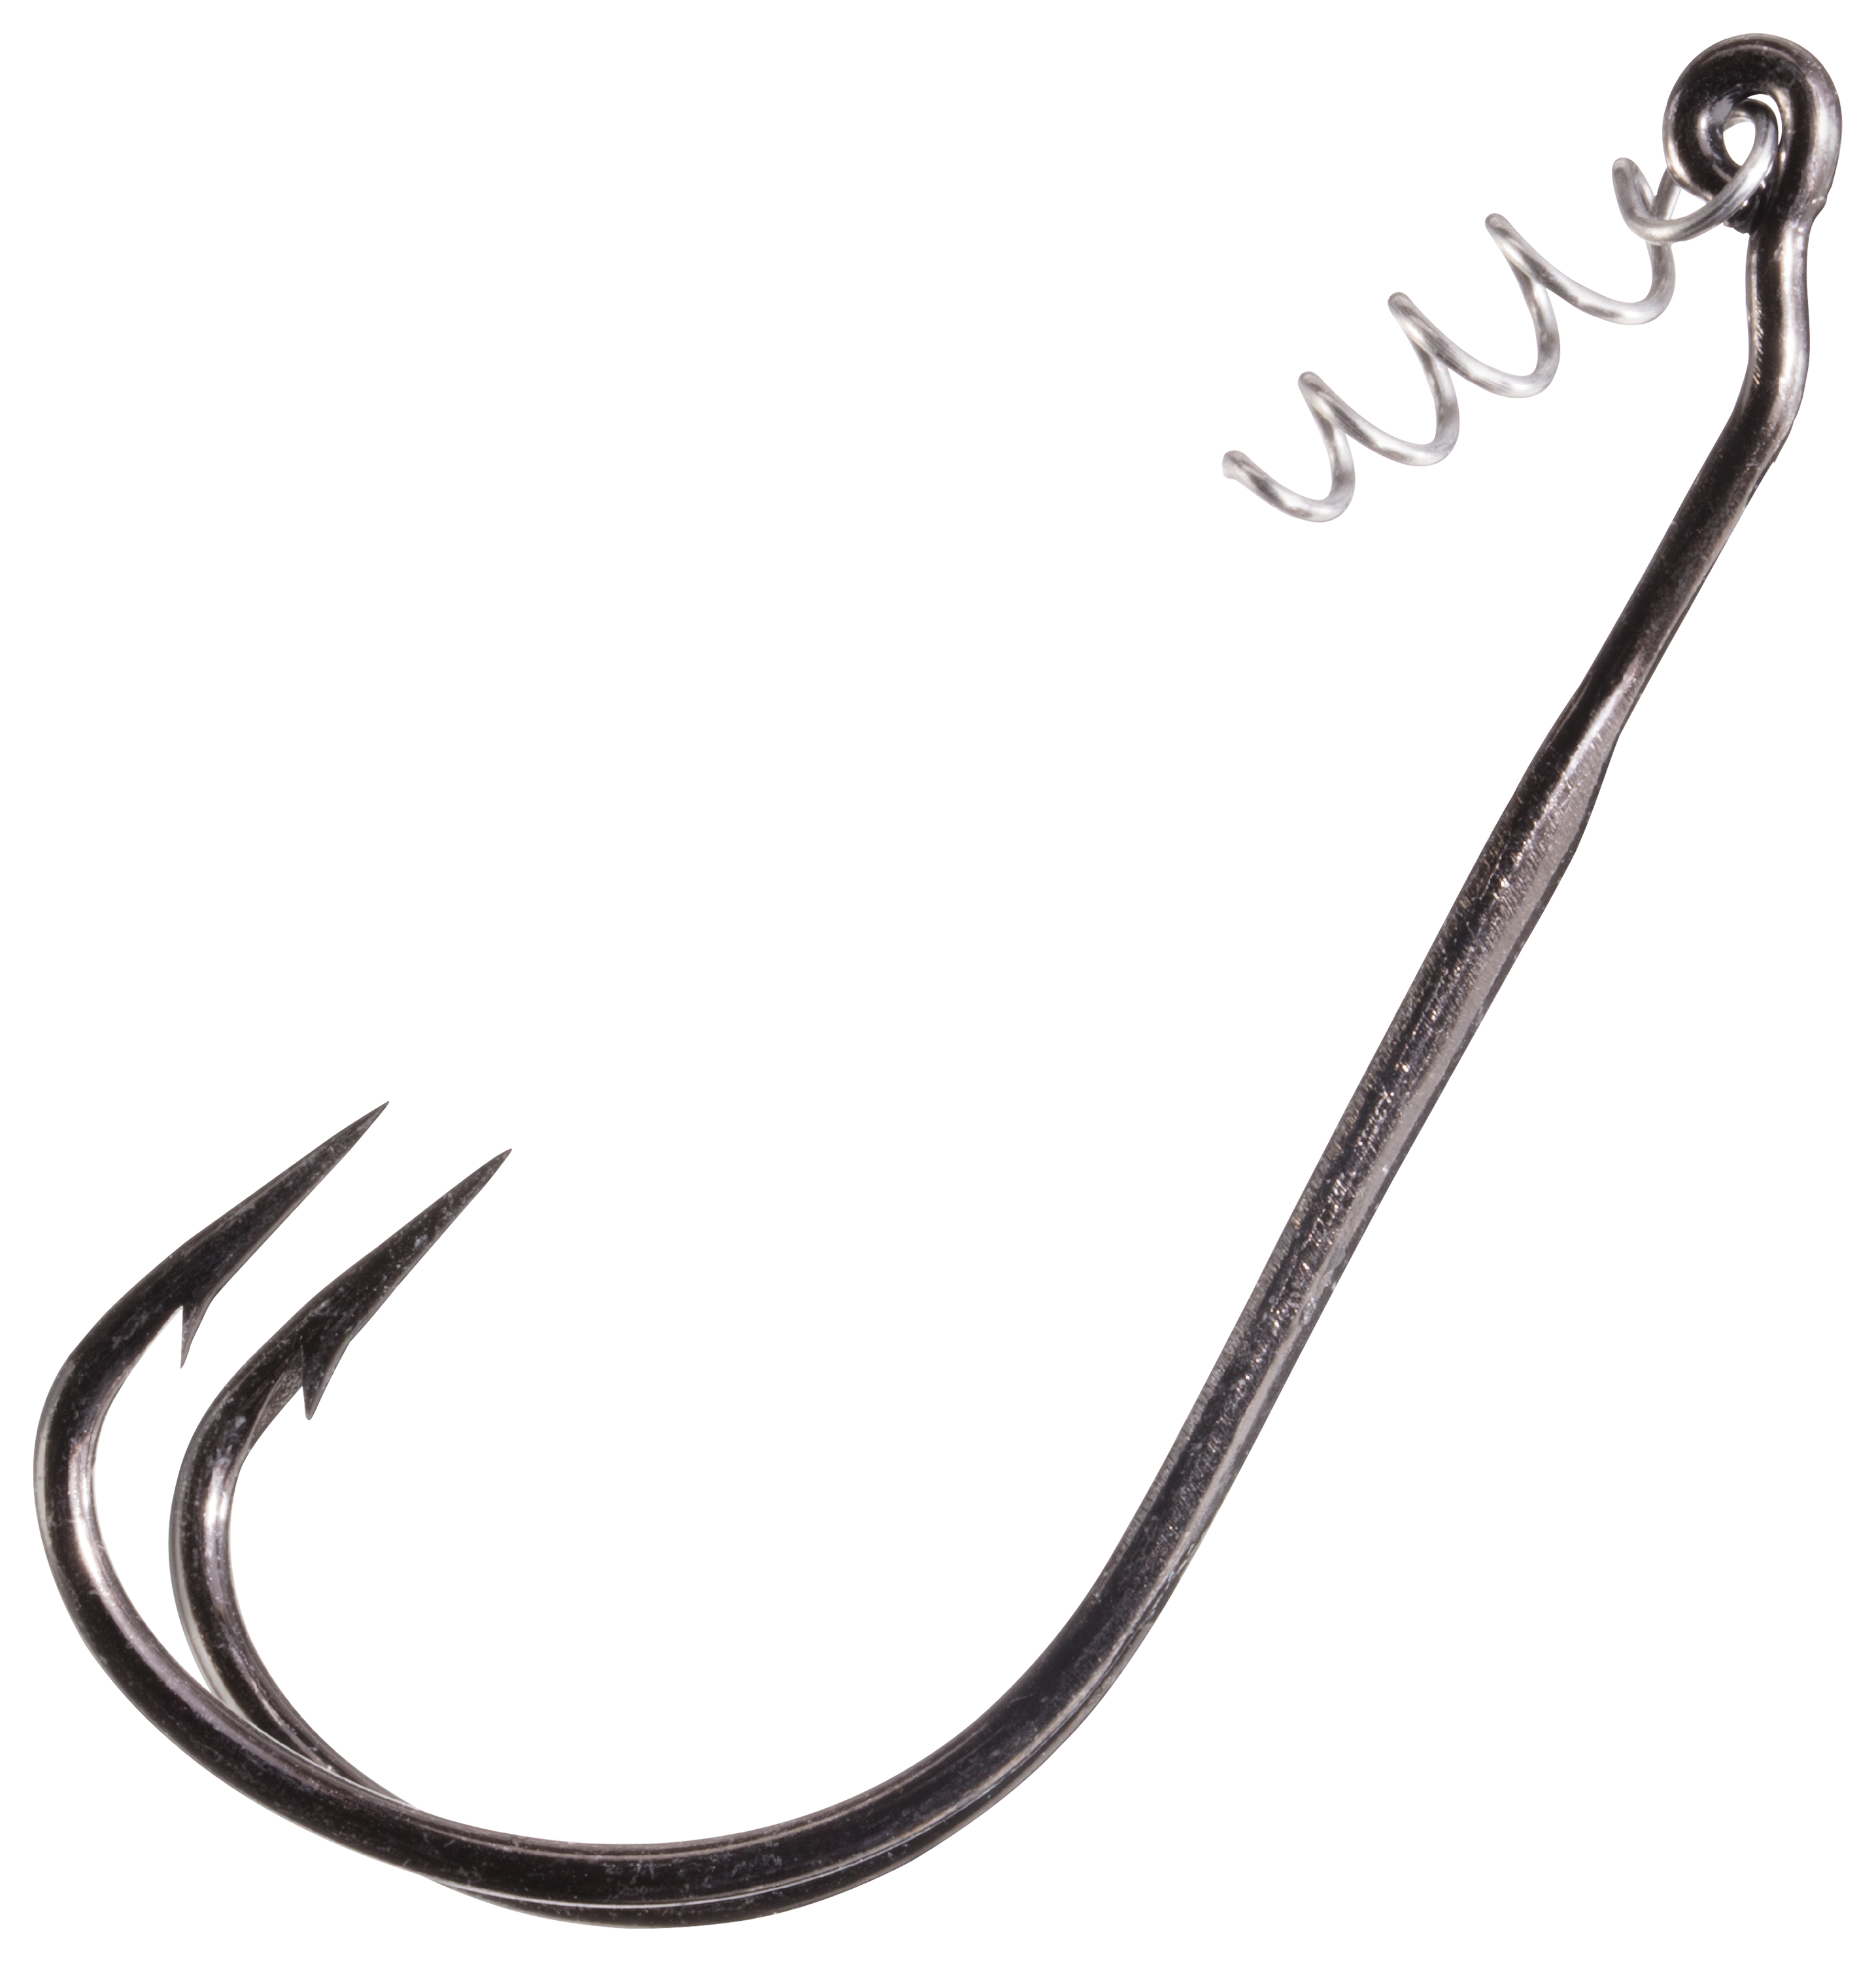 FTK 1/2 Box Double Fishing Hooks Japan Barbed High Carbon Steel Silicone  Lure Hook Frog